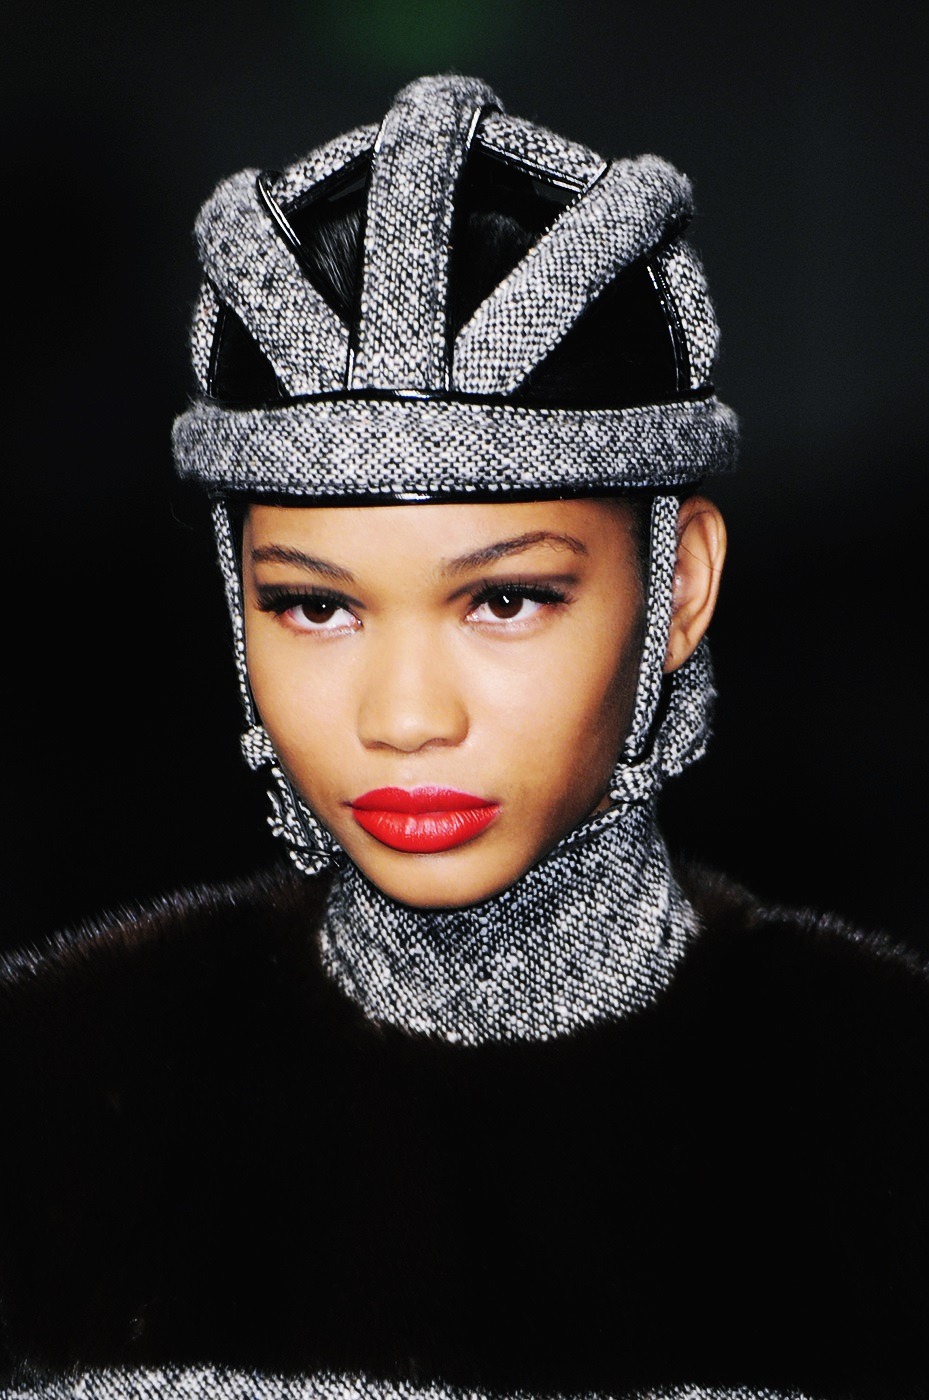 Chanel Iman at Jean Paul Gaultier Haute Couture Fall - Winter 2008/2009.